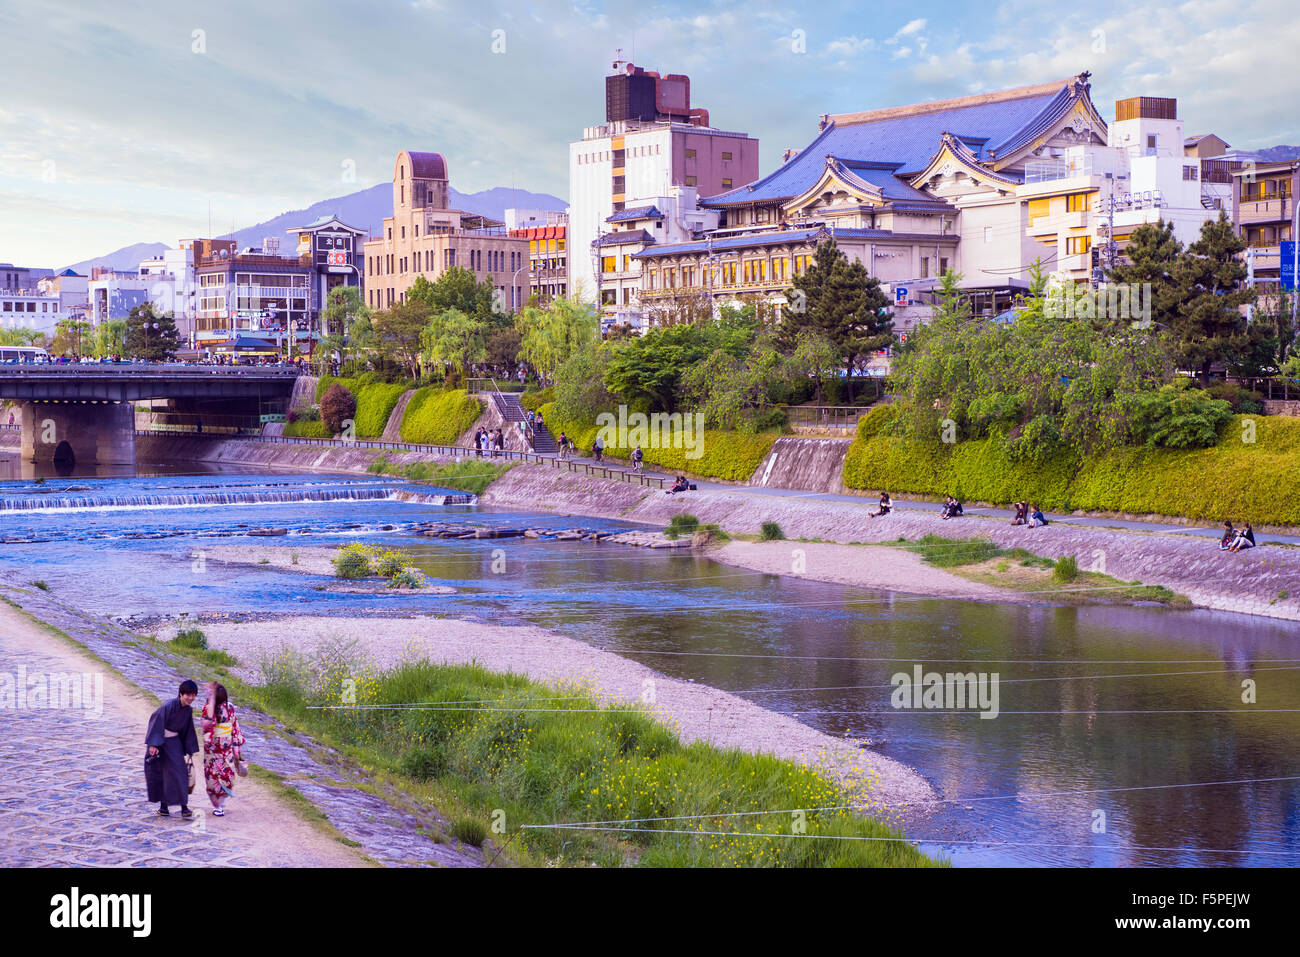 The Kamogawa River in central Kyoto Pontochou, Minami-za and Gion areas in the late afternoon Stock Photo